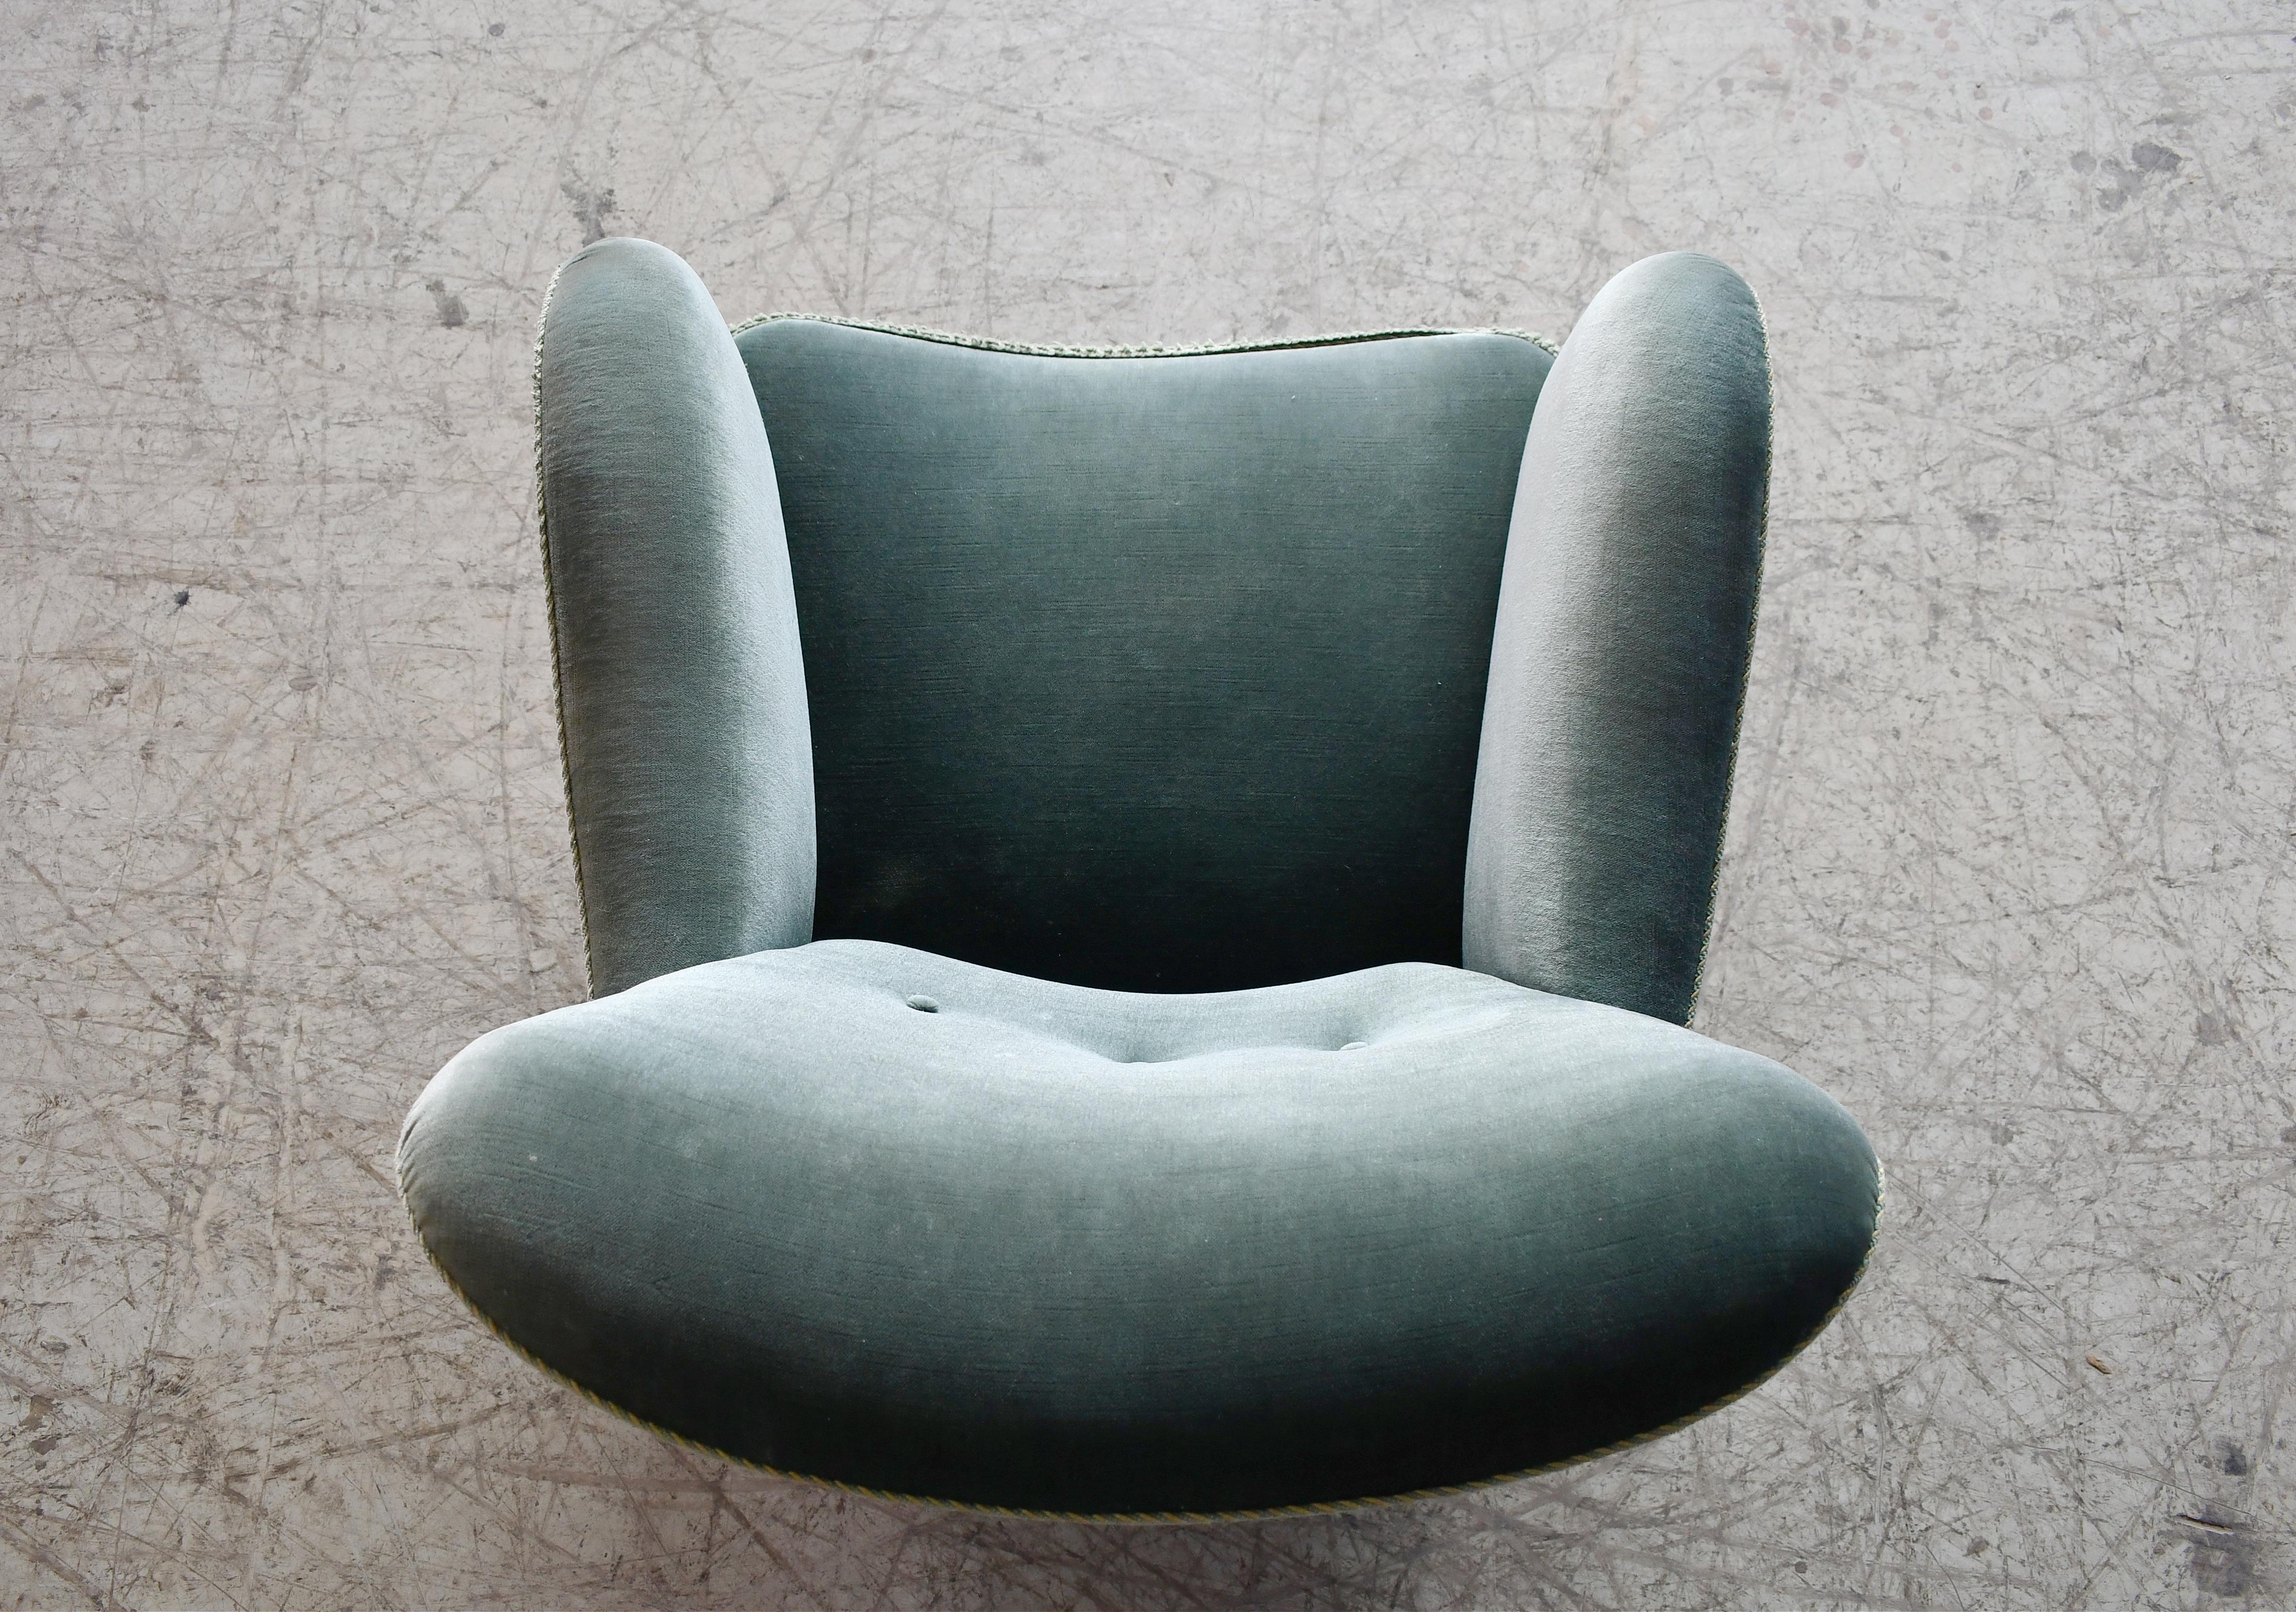 Danish Art Deco or Early Midcentury Lounge Chair in Green Mohair 1930-40s For Sale 5